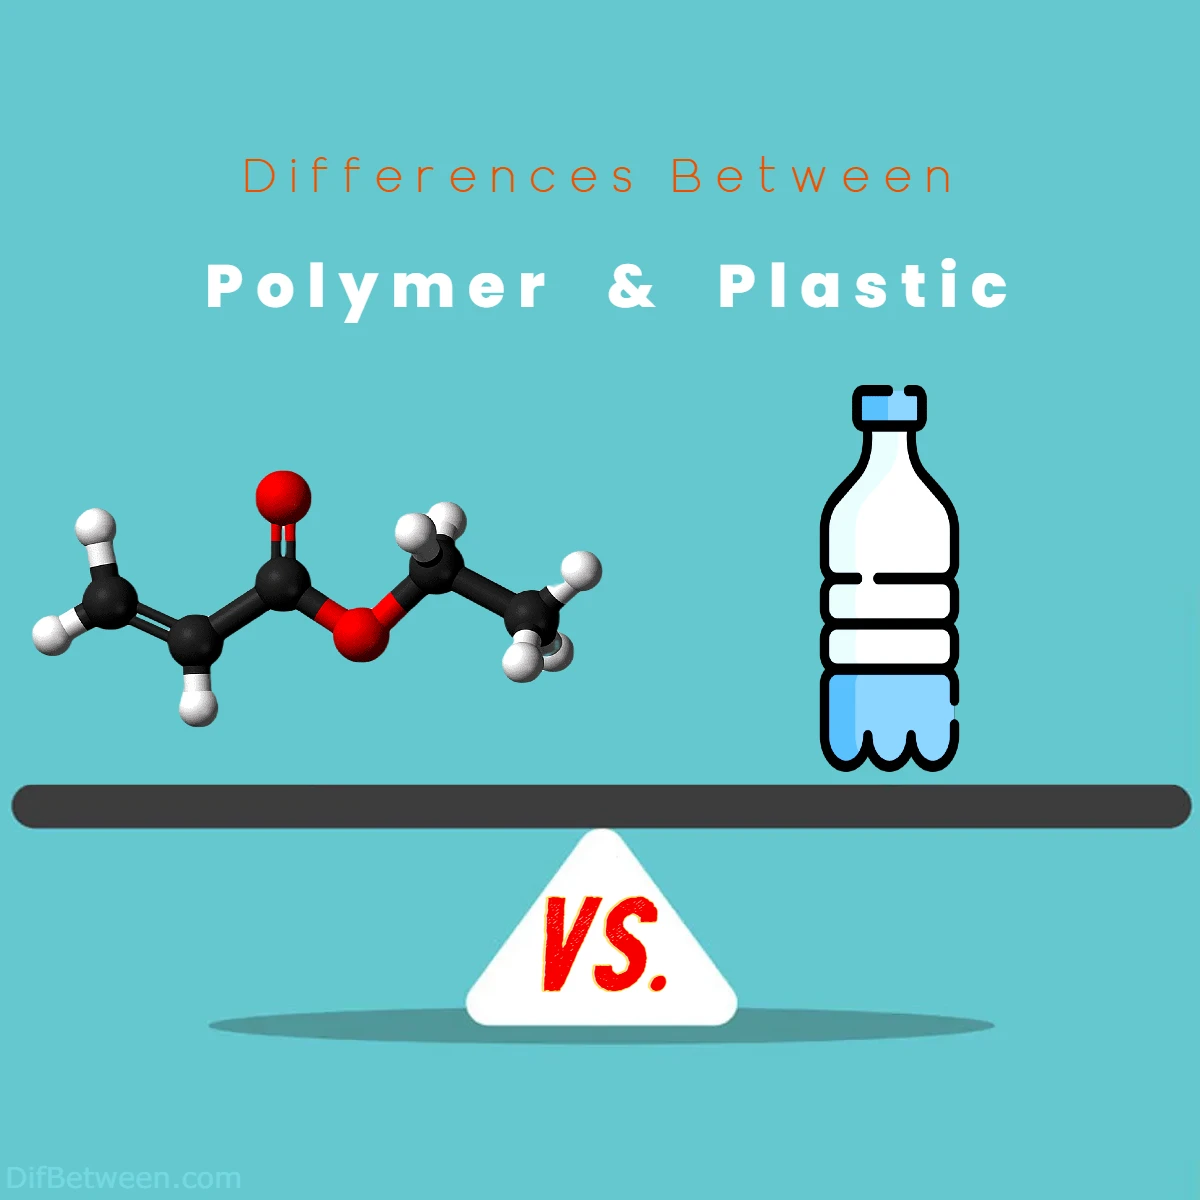 Differences Between Polymer vs Plastic